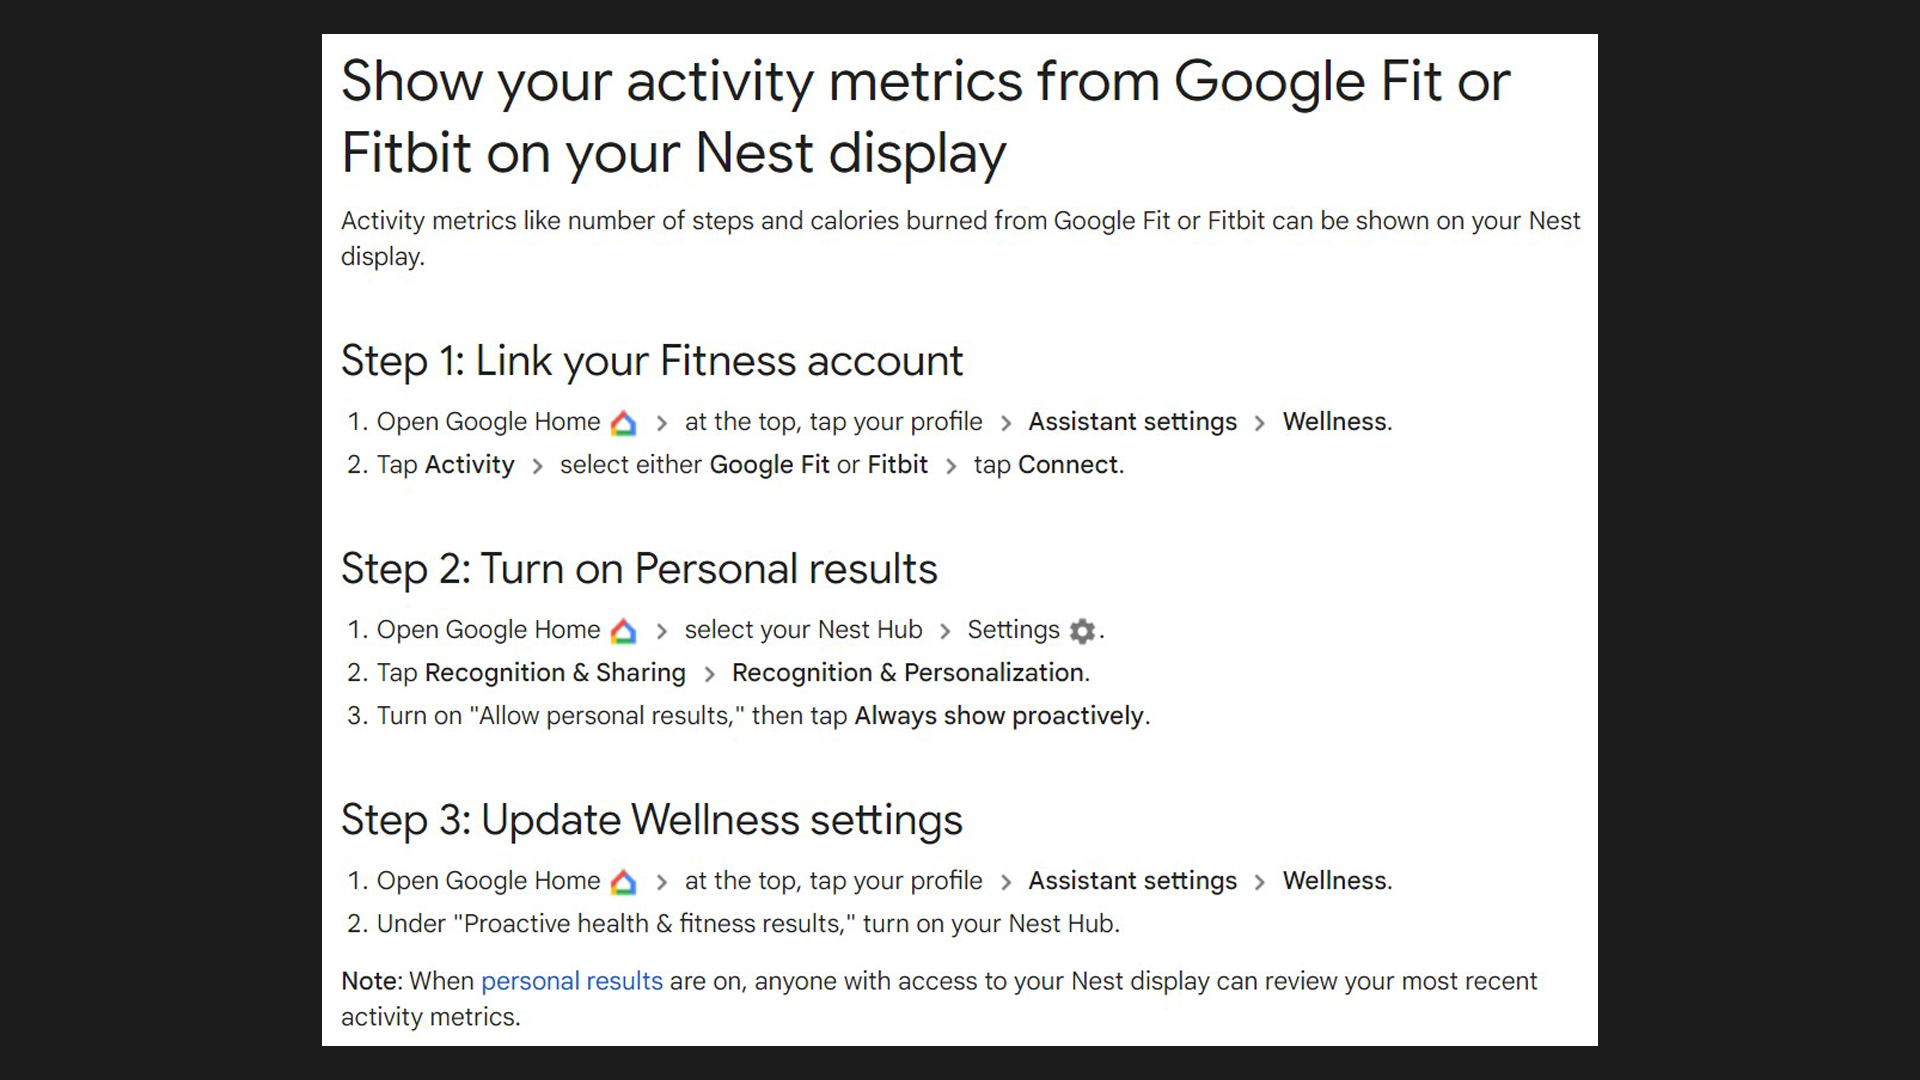 Details on how to show your activity metrics from Google Fit or Fitbit on your Nest display